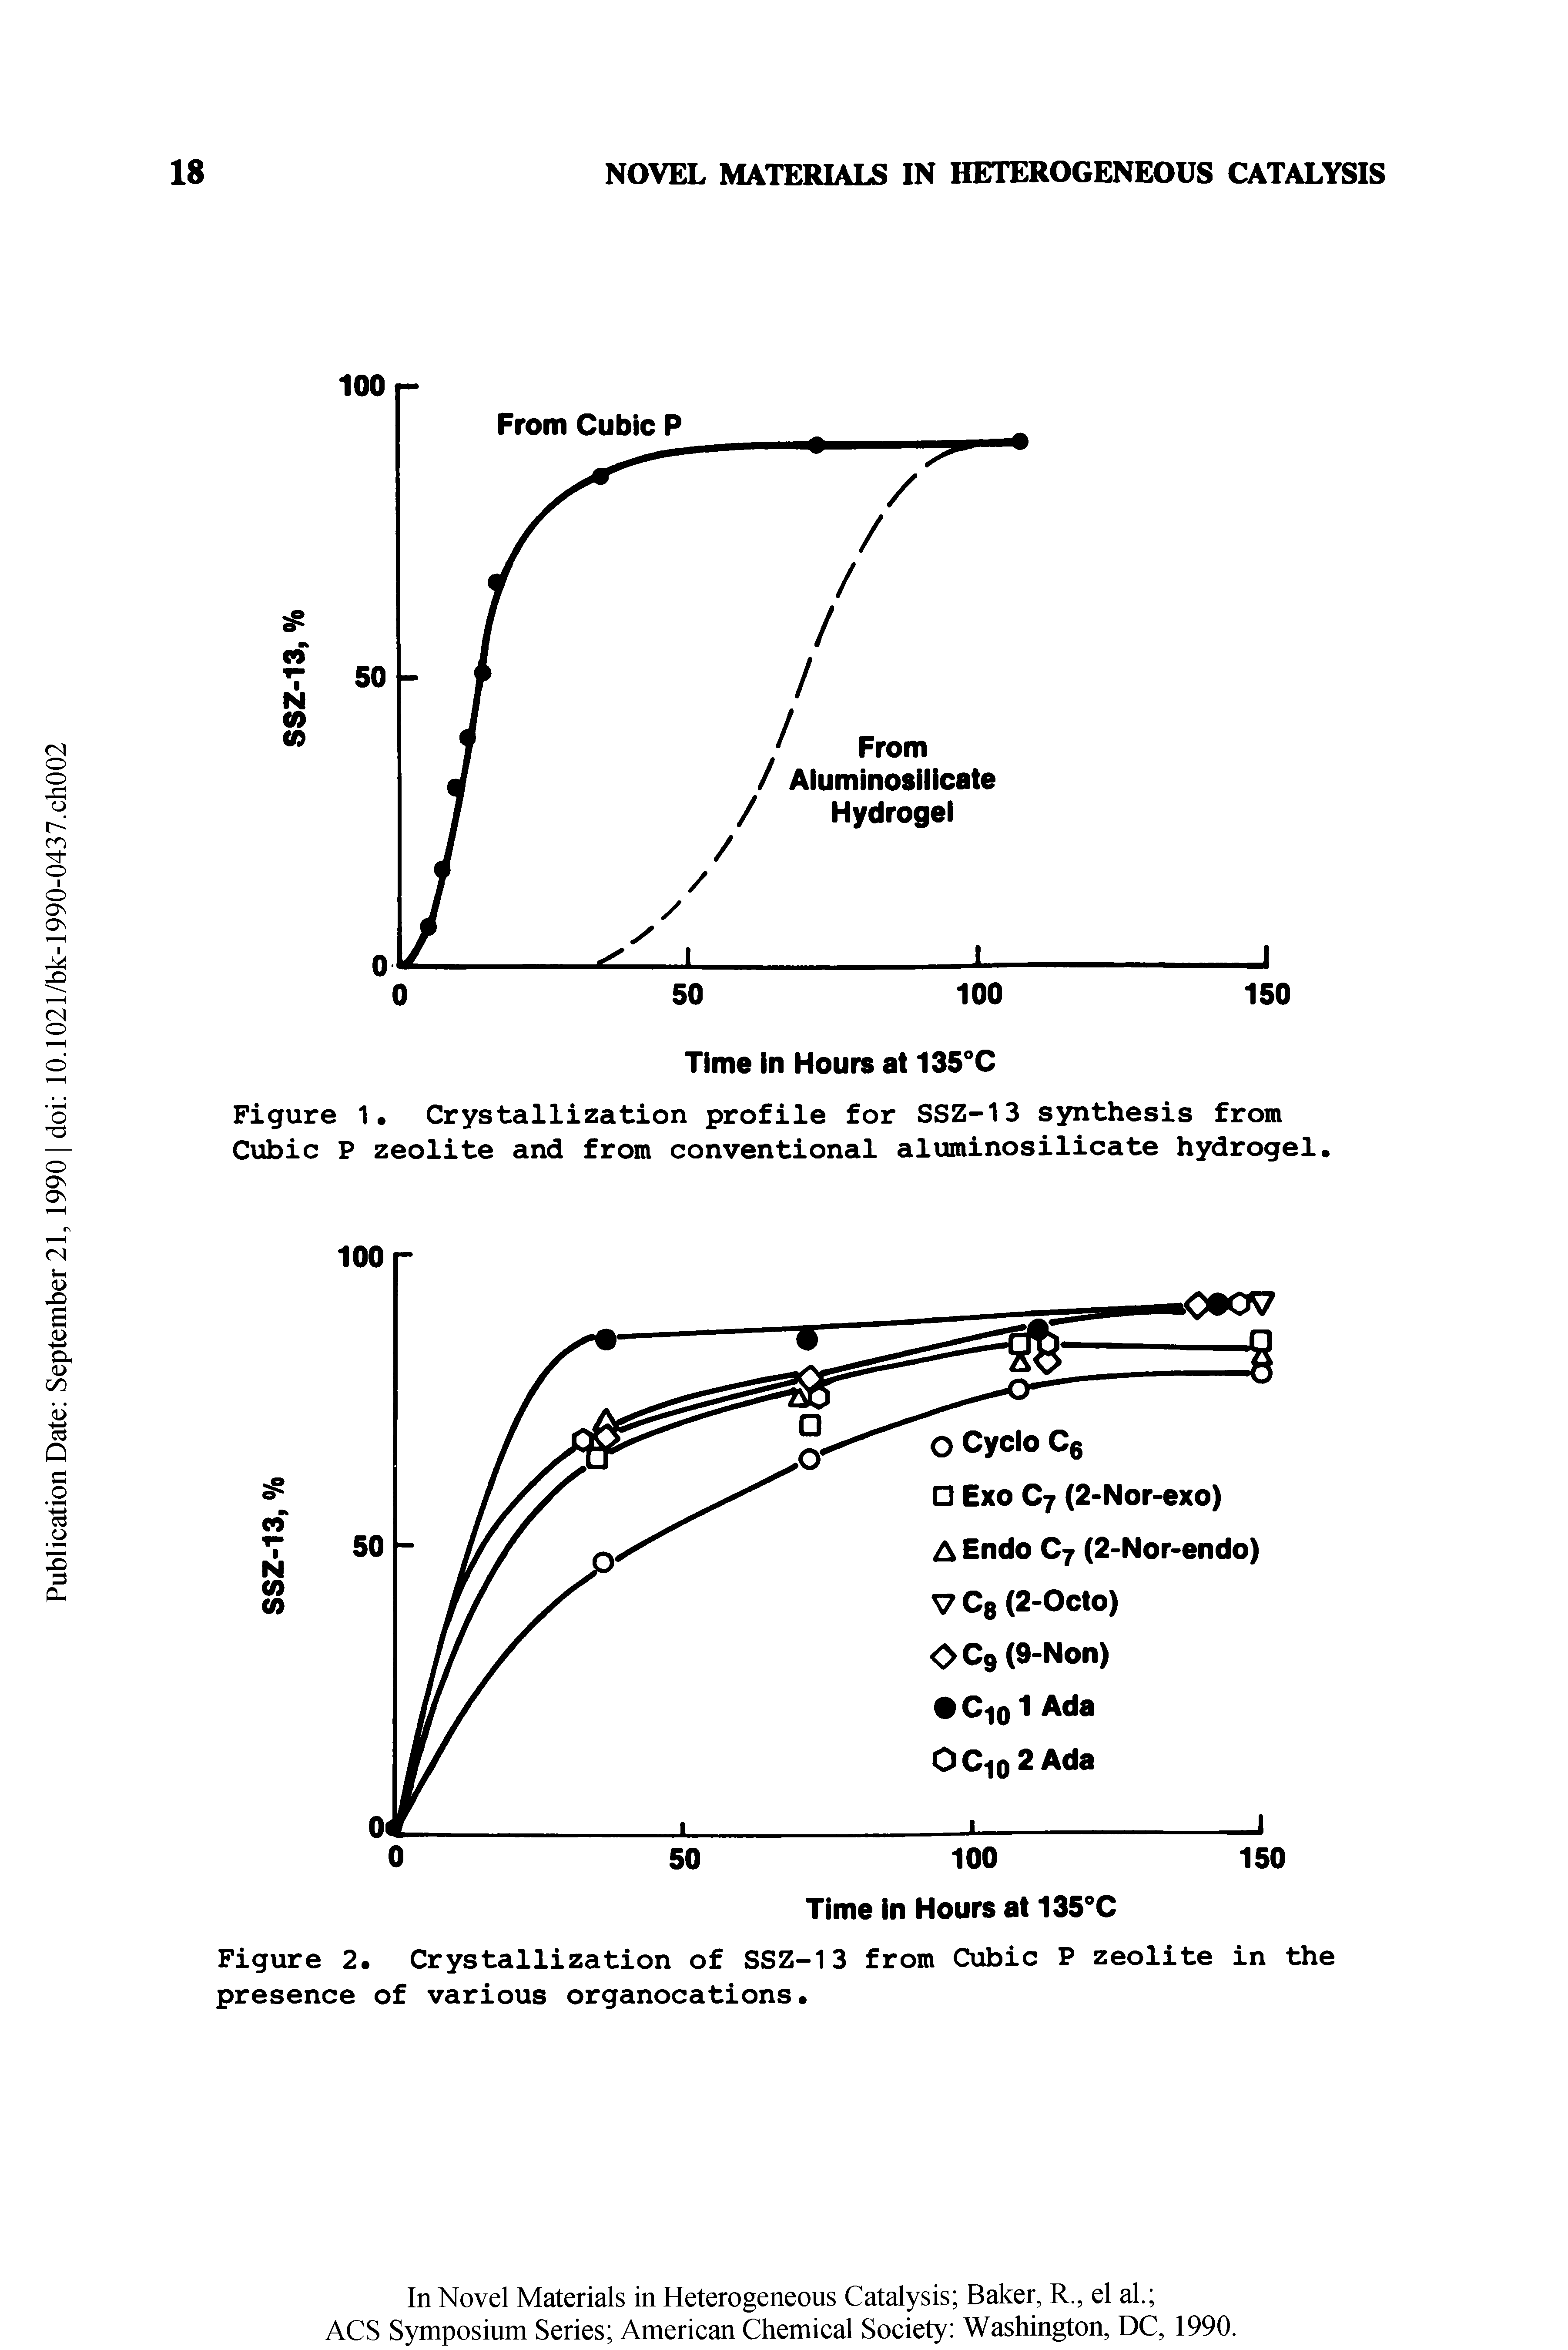 Figure 2. Crystallization of SSZ-13 from Cubic P zeolite in the presence of various organocations ...